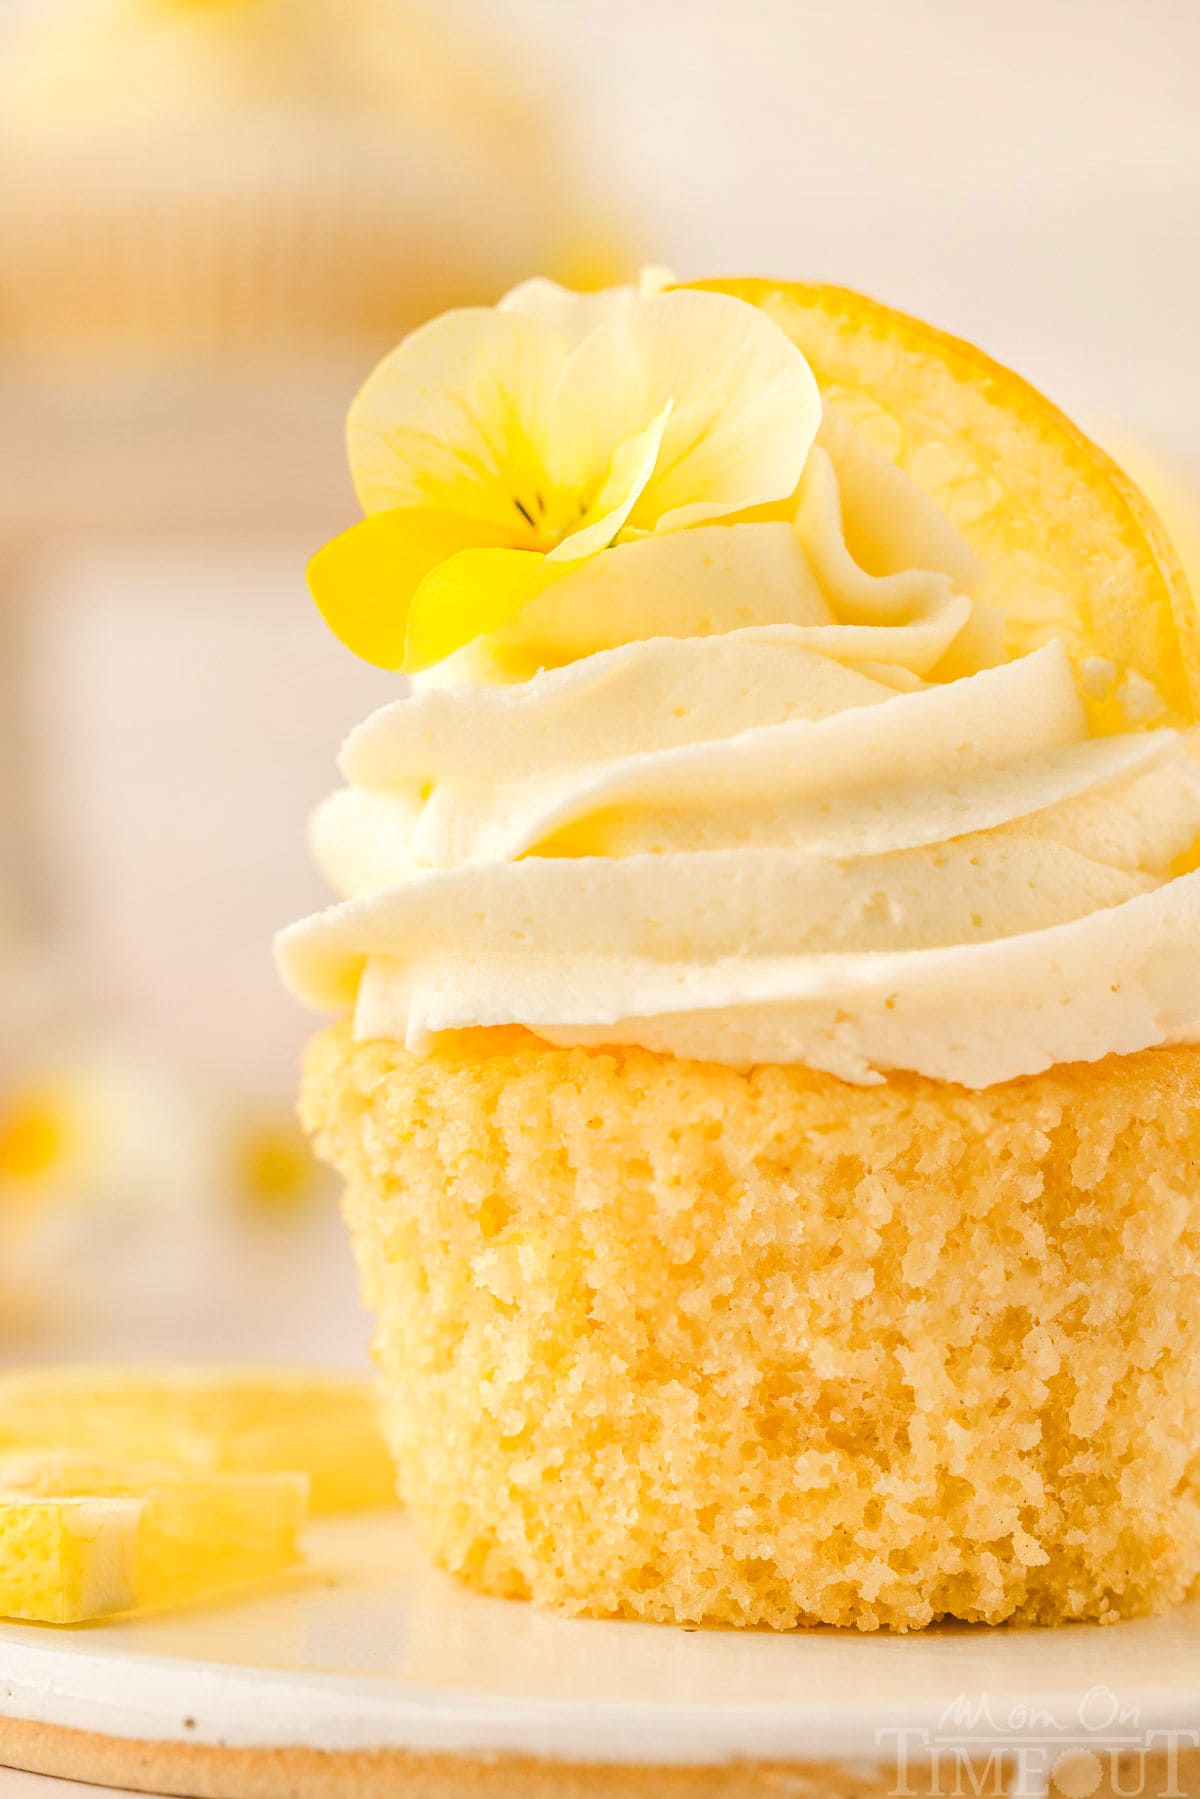 Close up side view of a lemon cupcake with a lemon wedge and flower garnish.